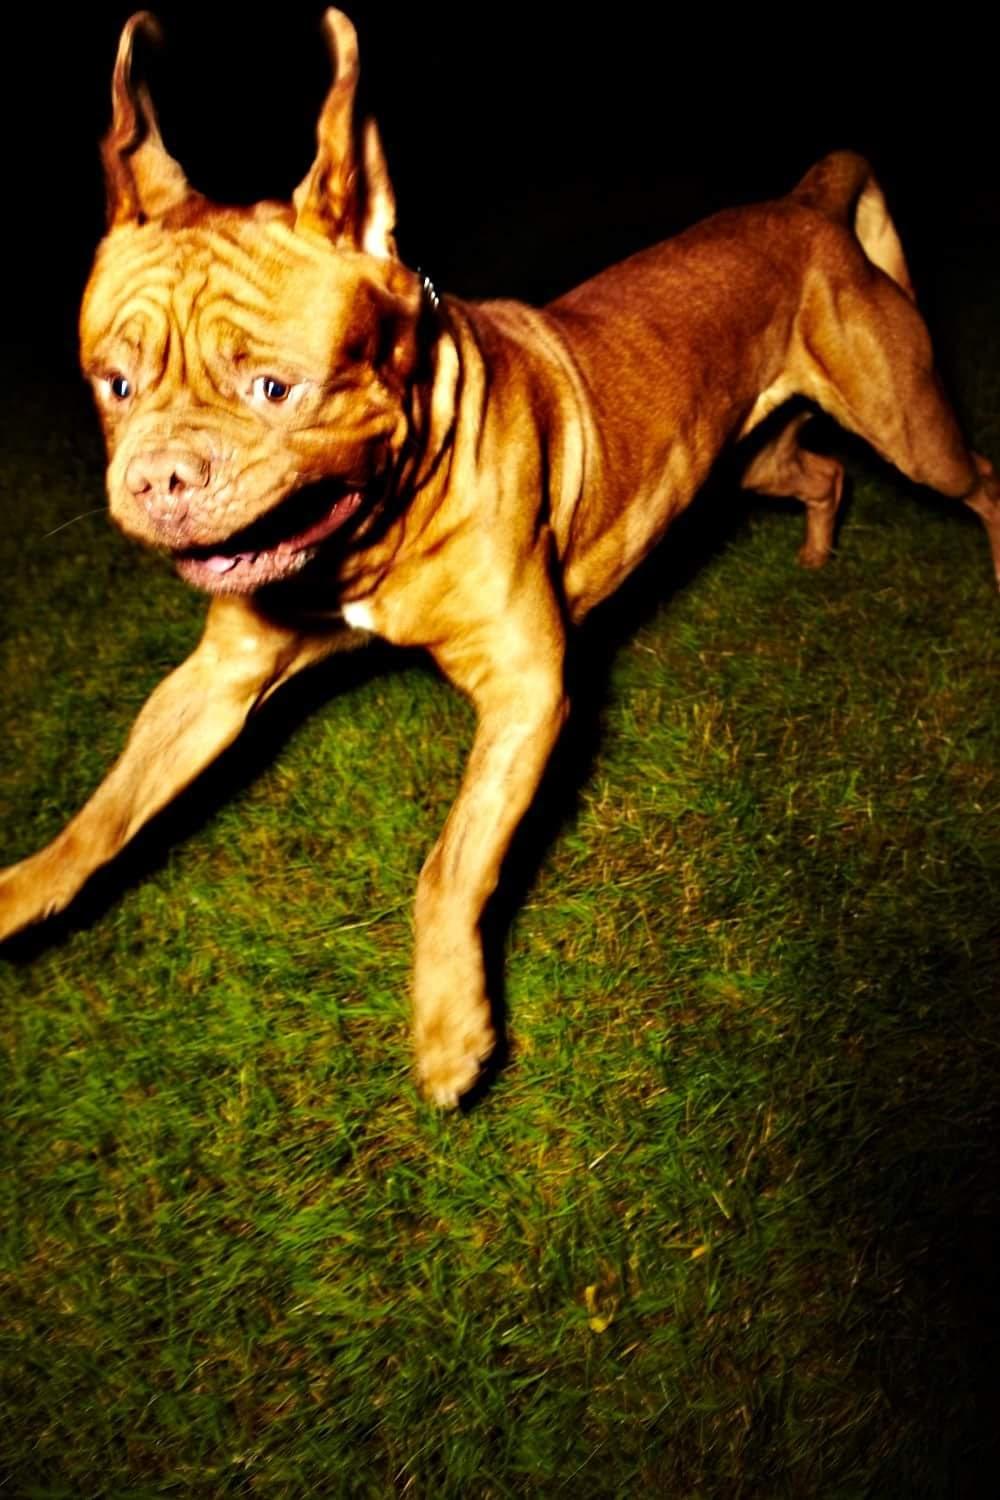 Or not it is droll having a stumble on dogue de Bordeaux working round